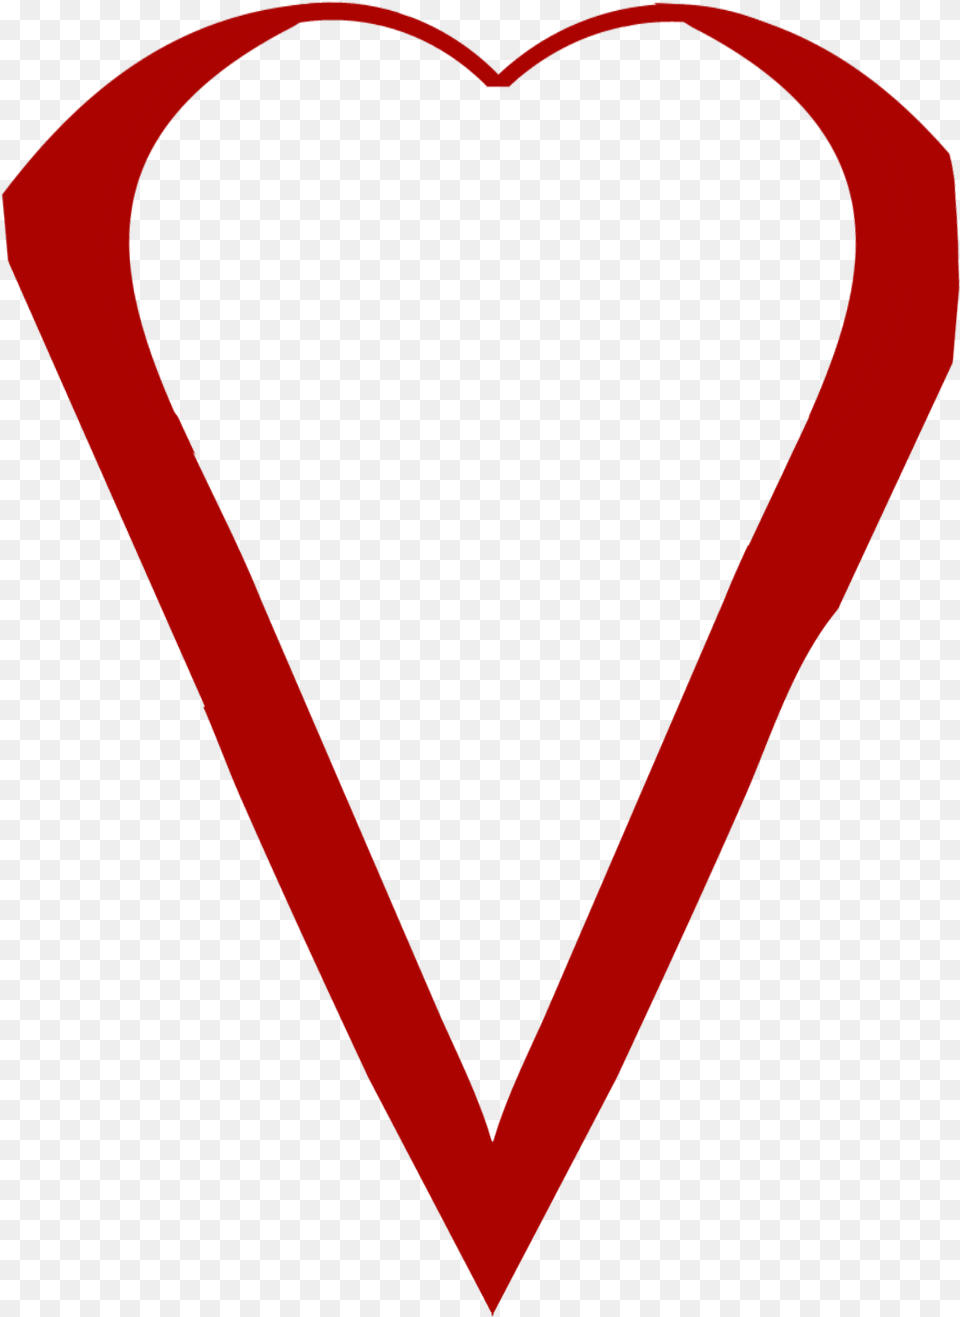 Heart Made From Assassin Creed Logo Love Freetoe Heart Free Transparent Png